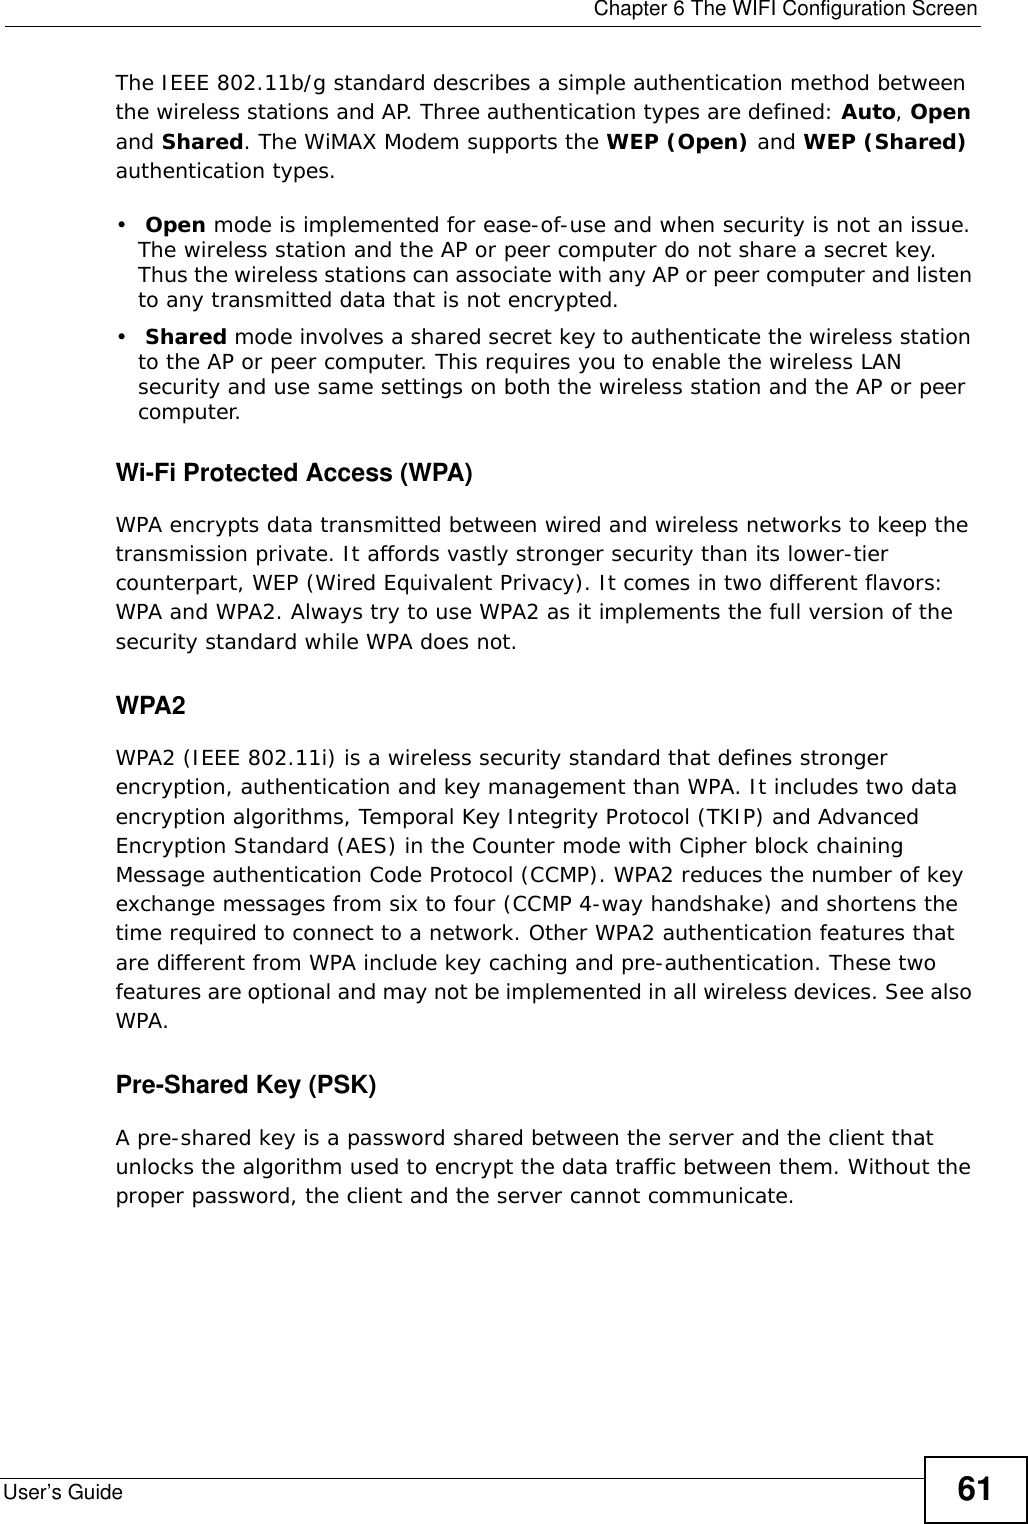  Chapter 6 The WIFI Configuration ScreenUser’s Guide 61The IEEE 802.11b/g standard describes a simple authentication method between the wireless stations and AP. Three authentication types are defined: Auto, Open and Shared. The WiMAX Modem supports the WEP (Open) and WEP (Shared) authentication types.• Open mode is implemented for ease-of-use and when security is not an issue. The wireless station and the AP or peer computer do not share a secret key. Thus the wireless stations can associate with any AP or peer computer and listen to any transmitted data that is not encrypted.• Shared mode involves a shared secret key to authenticate the wireless station to the AP or peer computer. This requires you to enable the wireless LAN security and use same settings on both the wireless station and the AP or peer computer.Wi-Fi Protected Access (WPA)WPA encrypts data transmitted between wired and wireless networks to keep the transmission private. It affords vastly stronger security than its lower-tier counterpart, WEP (Wired Equivalent Privacy). It comes in two different flavors: WPA and WPA2. Always try to use WPA2 as it implements the full version of the security standard while WPA does not.WPA2 WPA2 (IEEE 802.11i) is a wireless security standard that defines stronger encryption, authentication and key management than WPA. It includes two data encryption algorithms, Temporal Key Integrity Protocol (TKIP) and Advanced Encryption Standard (AES) in the Counter mode with Cipher block chaining Message authentication Code Protocol (CCMP). WPA2 reduces the number of key exchange messages from six to four (CCMP 4-way handshake) and shortens the time required to connect to a network. Other WPA2 authentication features that are different from WPA include key caching and pre-authentication. These two features are optional and may not be implemented in all wireless devices. See also WPA.Pre-Shared Key (PSK)A pre-shared key is a password shared between the server and the client that unlocks the algorithm used to encrypt the data traffic between them. Without the proper password, the client and the server cannot communicate.